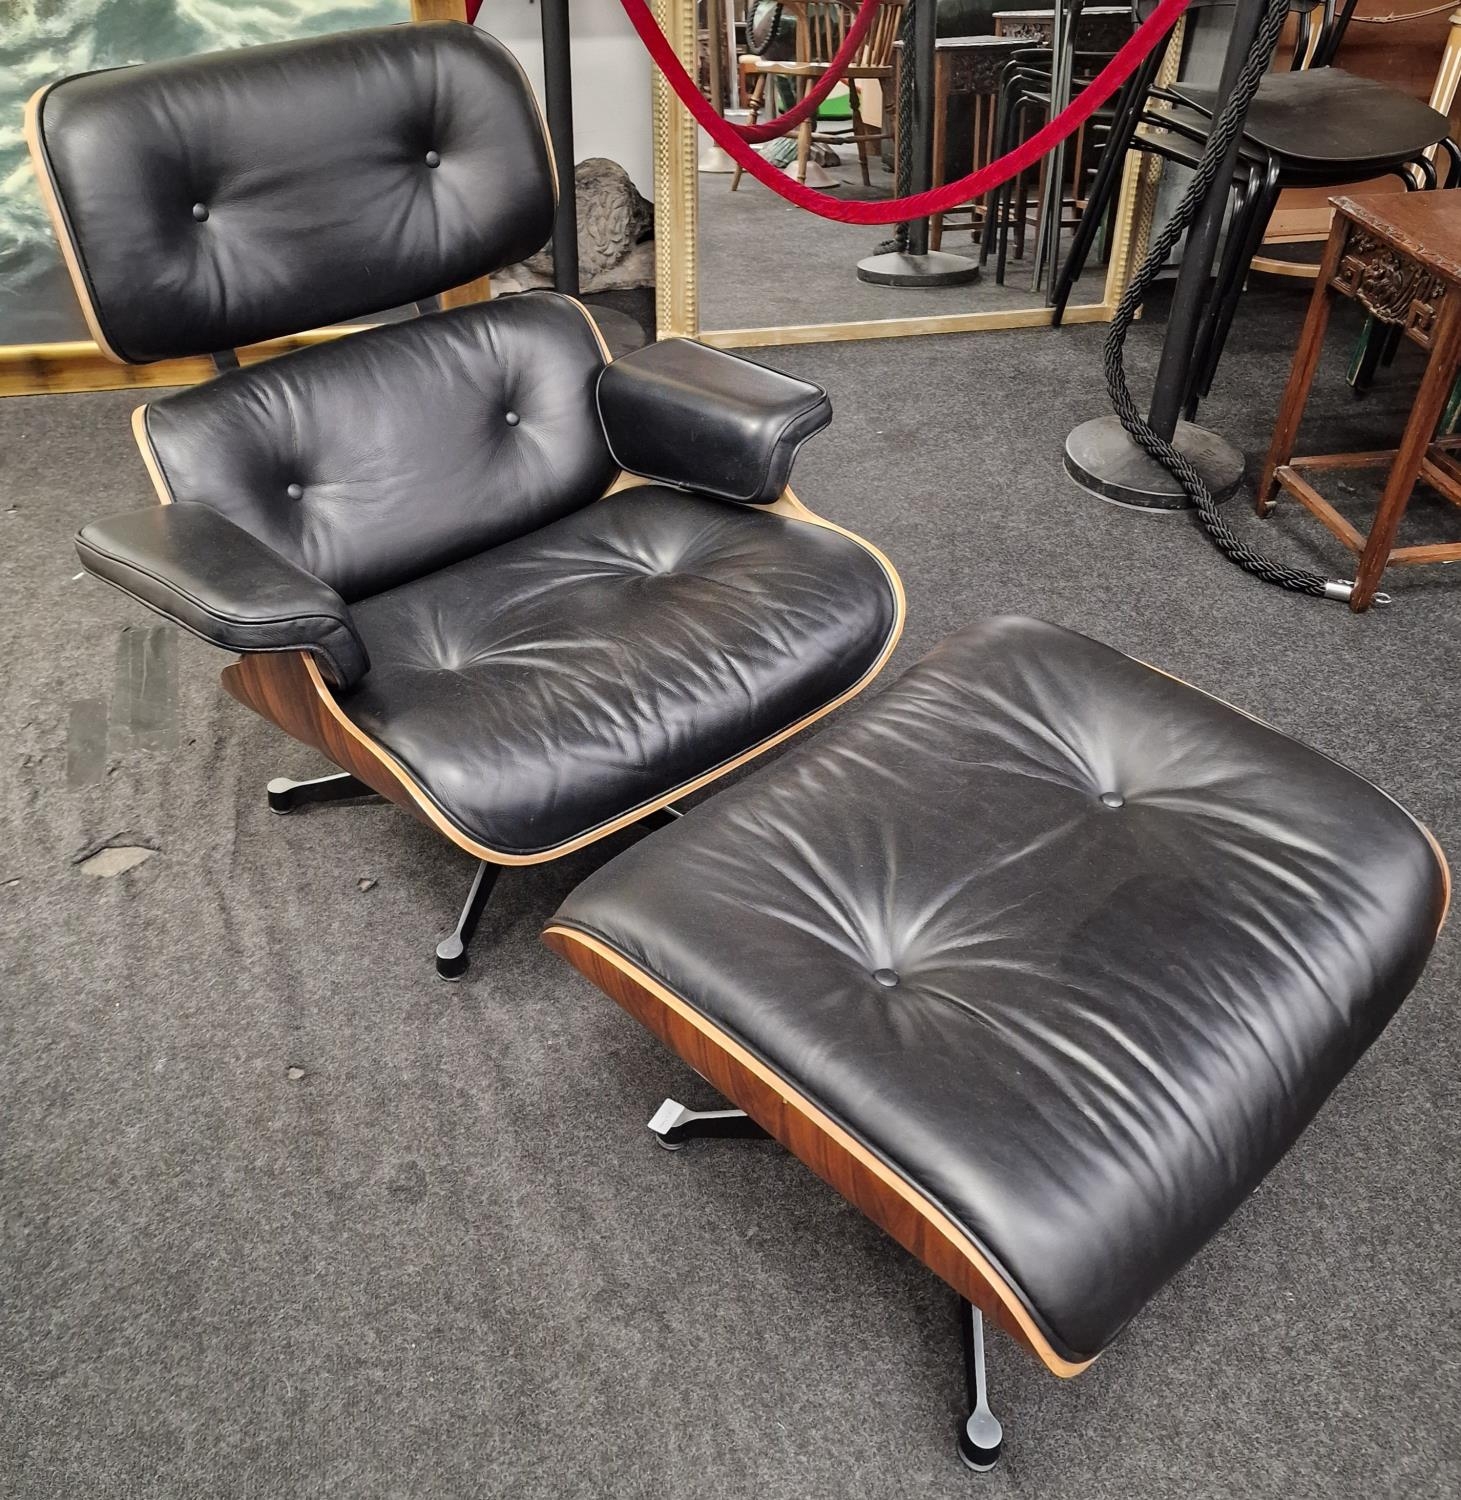 Eames style chair together the matching foot stool in clean condition chair 90x80x70cm stool is